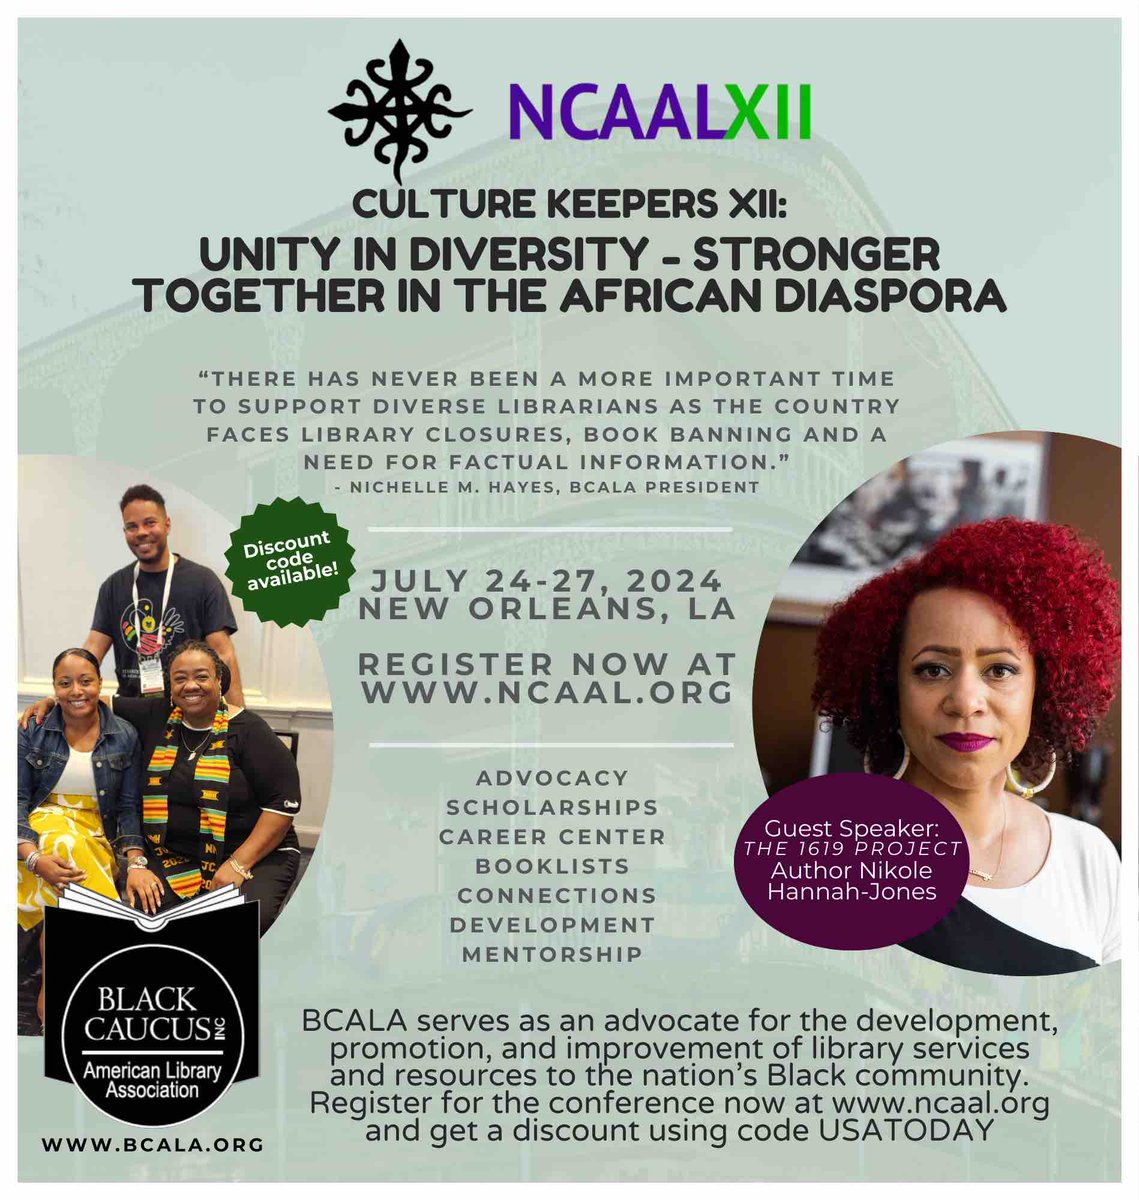 📣We’re happy to announce that Nikole Hannah Jones (@nhannahjones) will be joining us for the 12th National Conference of African American Librarians (NCAAL XII). Have you registered? Visit ncaal.org to learn more. Early Bird discount rate available until 4/17/24!